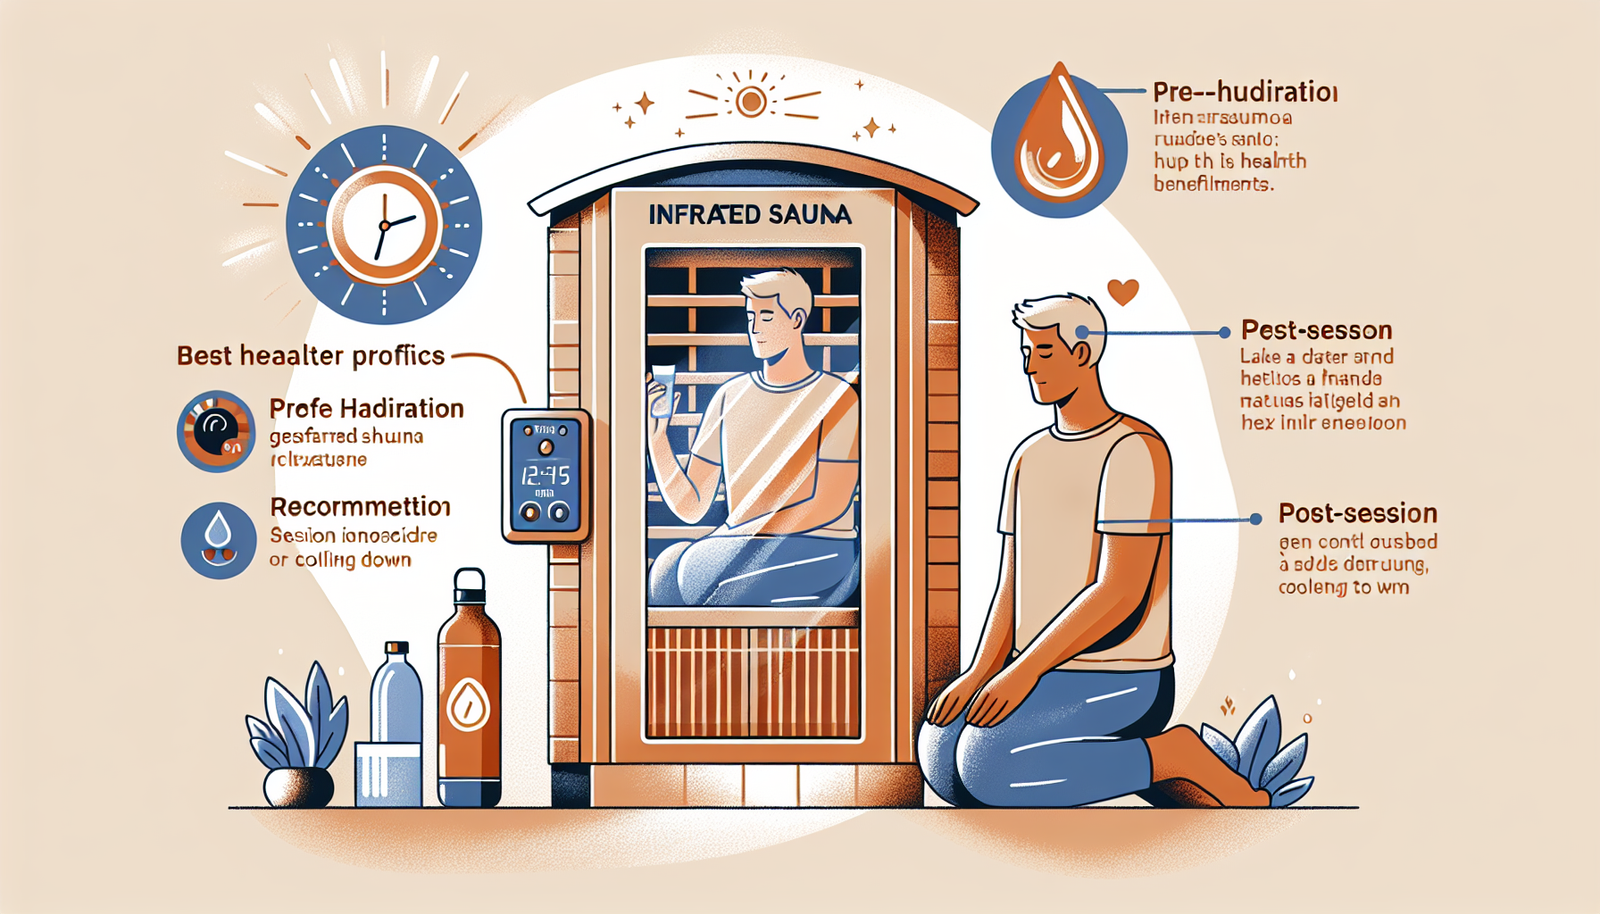 How Can I Optimize My Infrared Sauna Session?